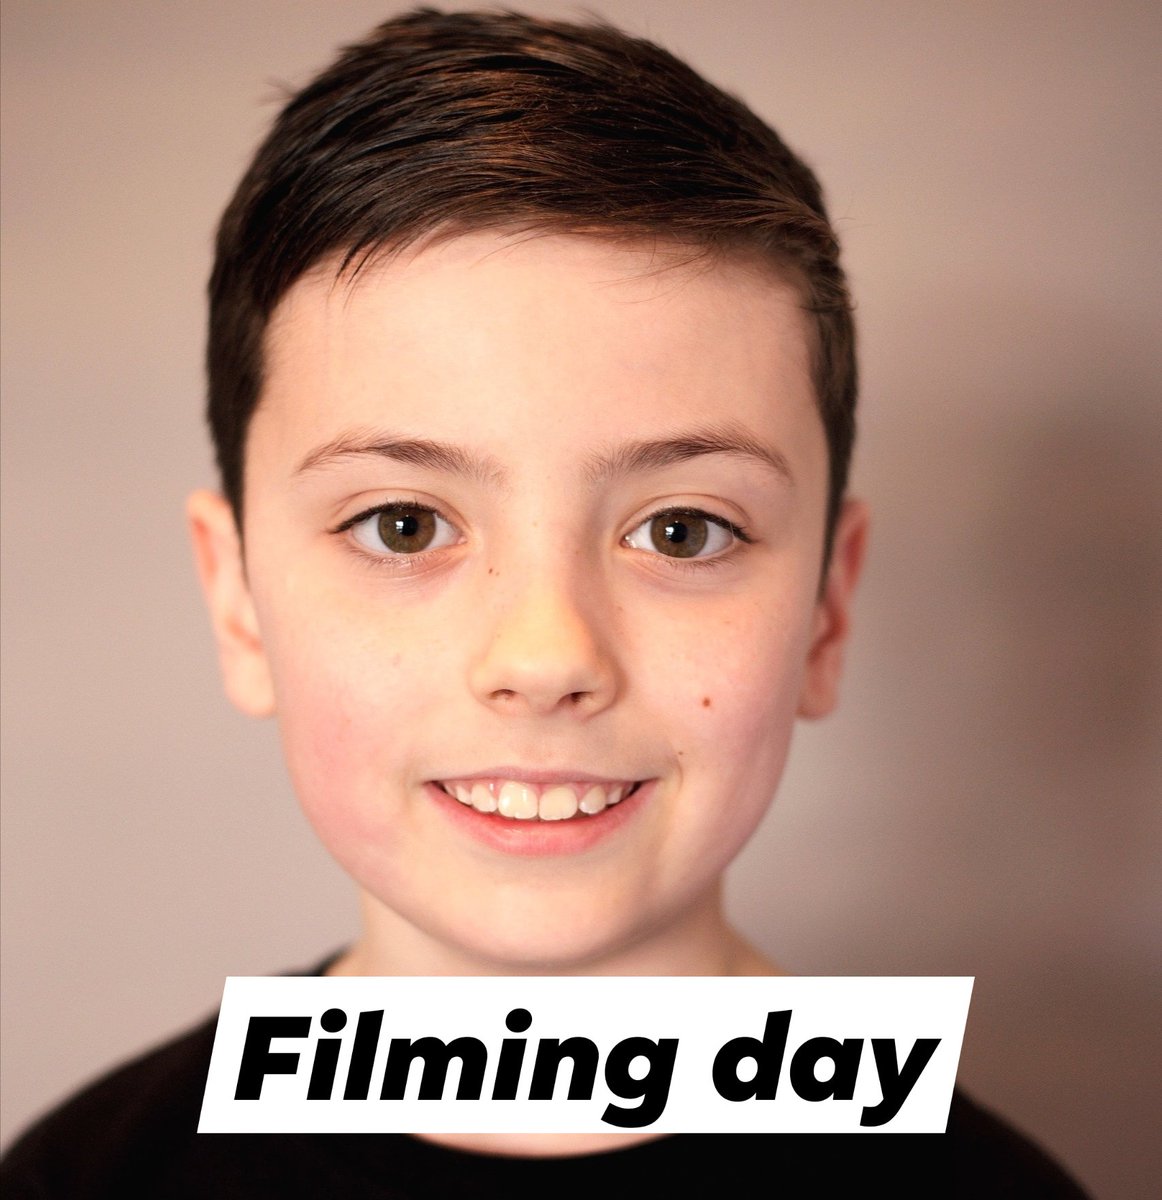 IT'S FILMING DAY TODAY 🎬🎥🎉 @hashtagtalentag @SupportBritish #filmingday #onset #leadrole #shortfilm #travelling